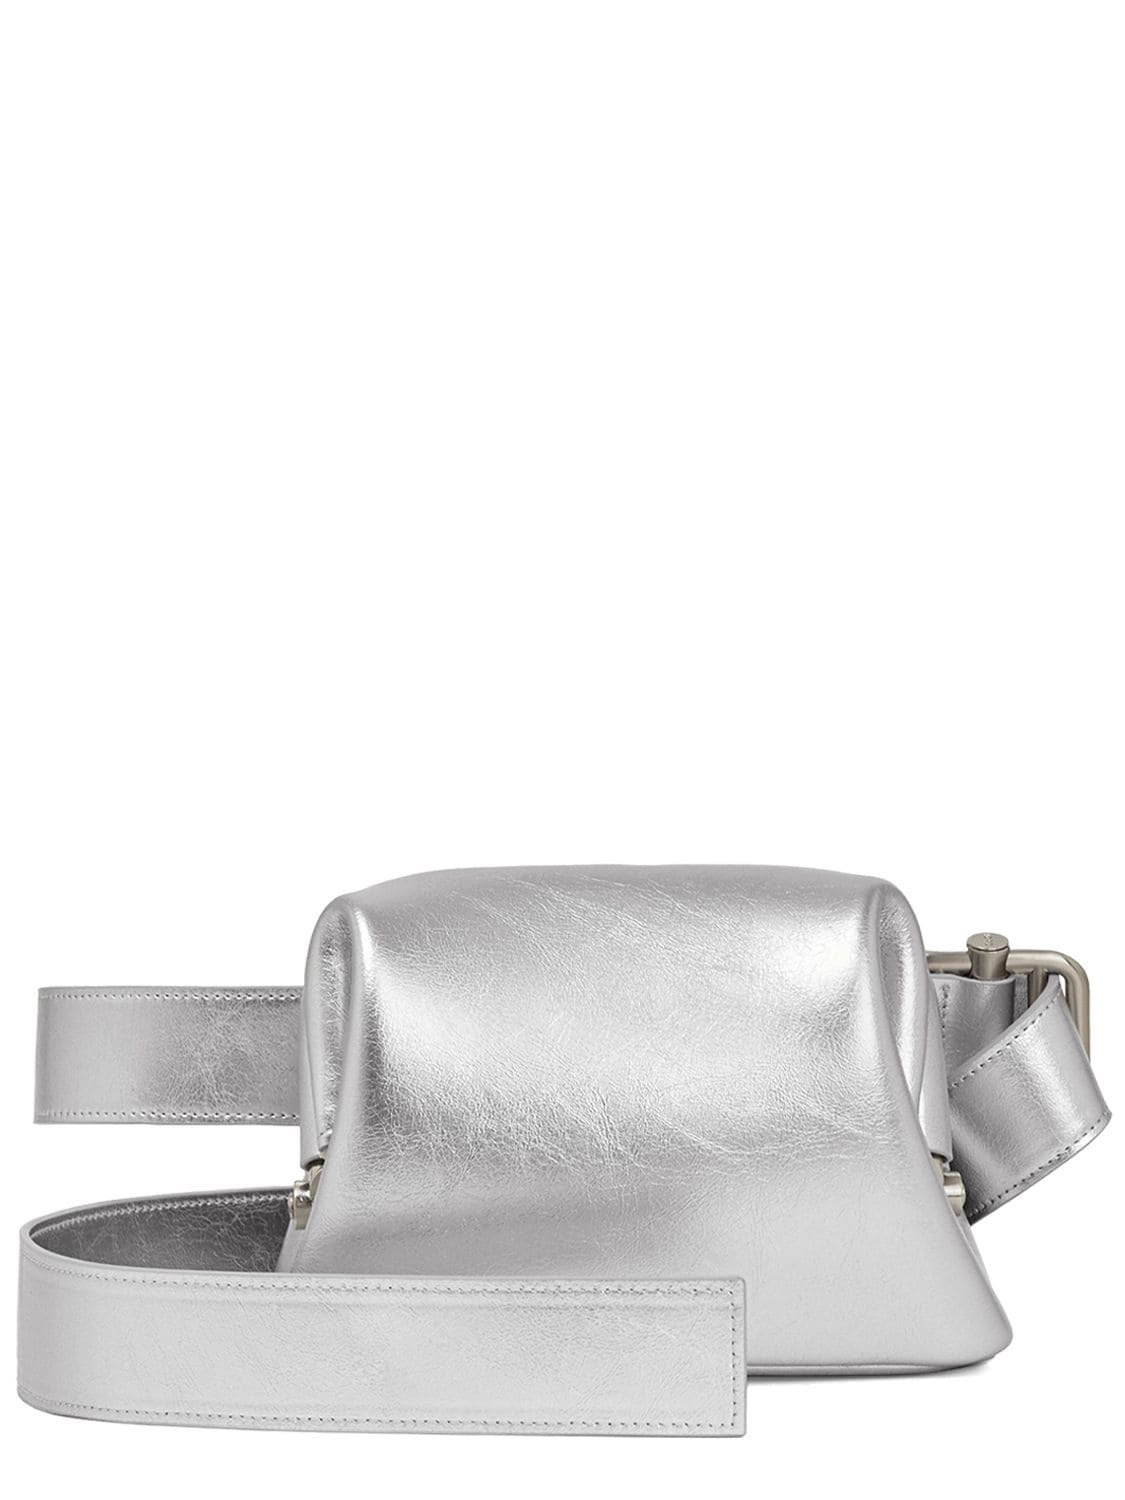 OSOI Pecan Brot Leather Shoulder Bag in silver